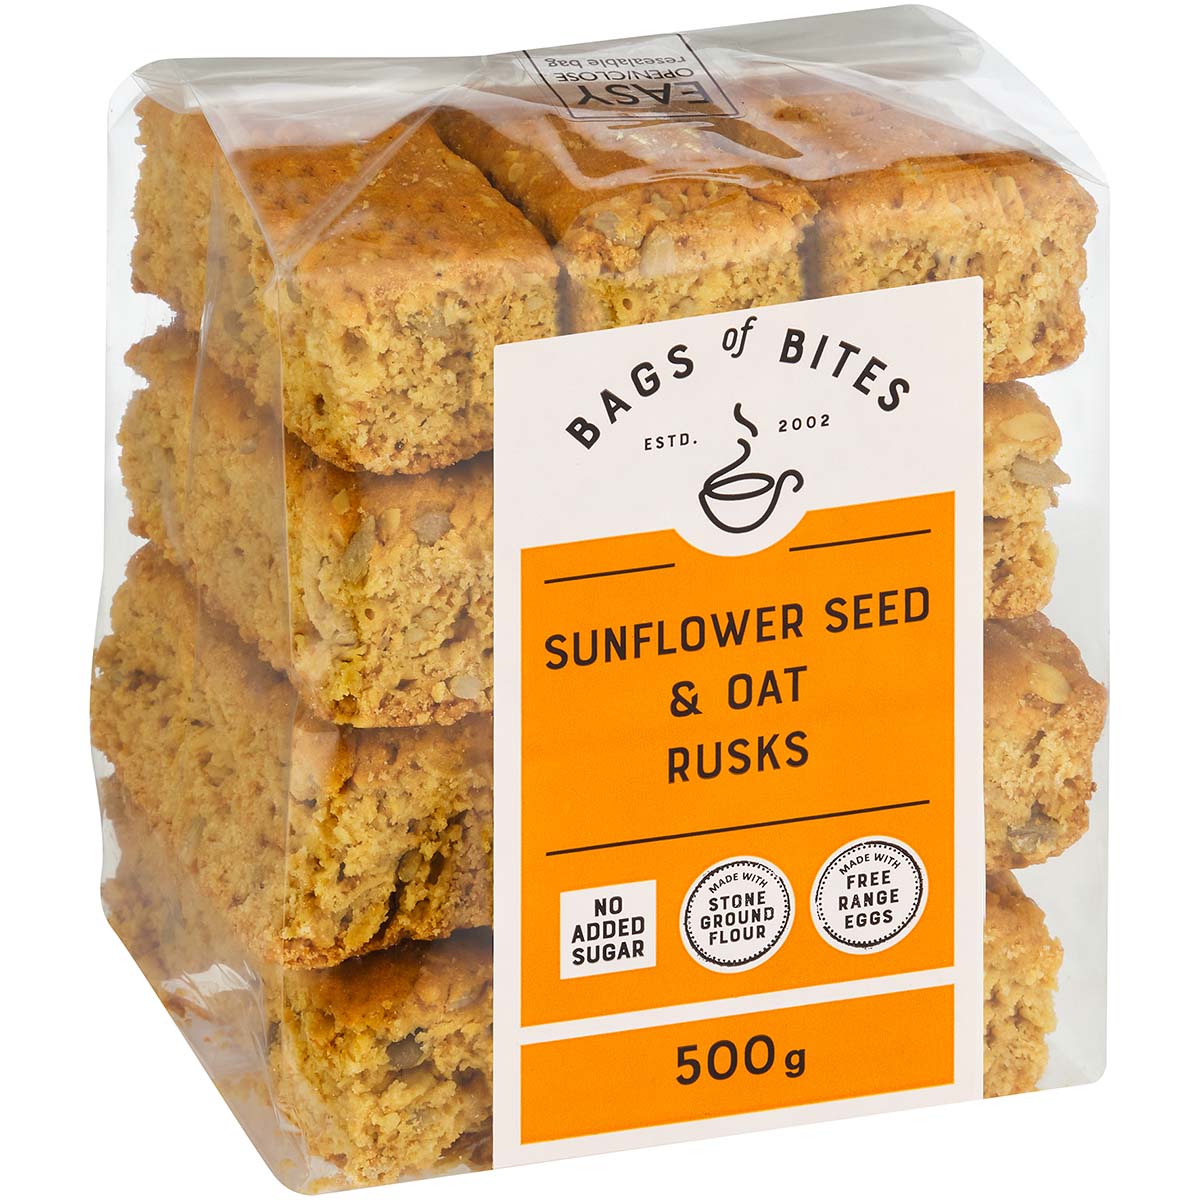 Sunflower Seed & Oat Rusks - No Added Sugar